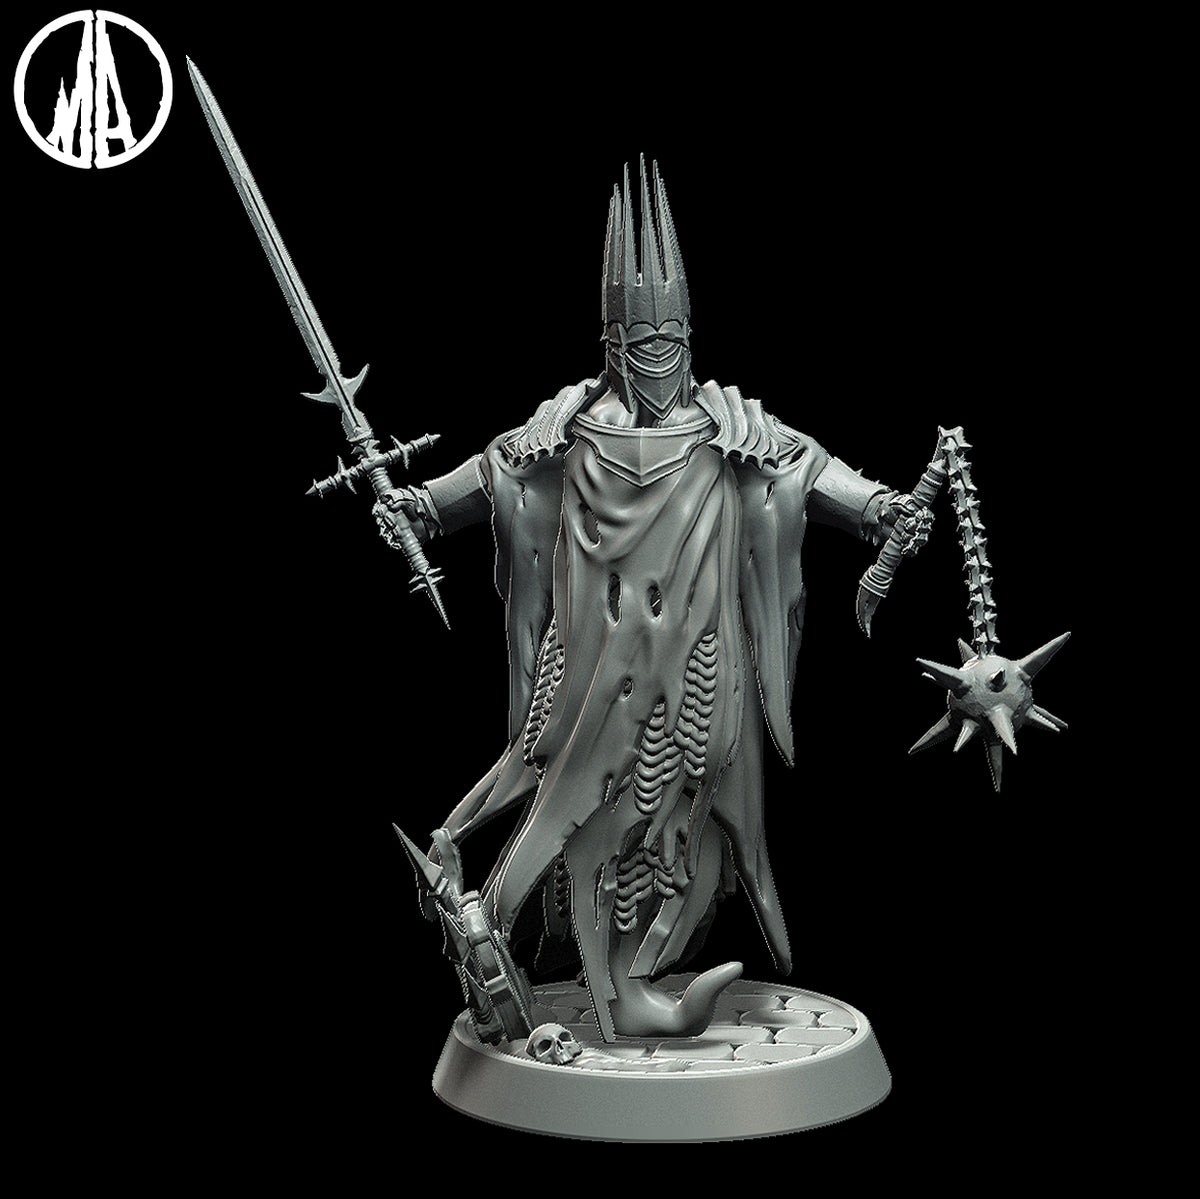 Wraith King | 32mm Scale Resin Model | From the Lost Souls Collection